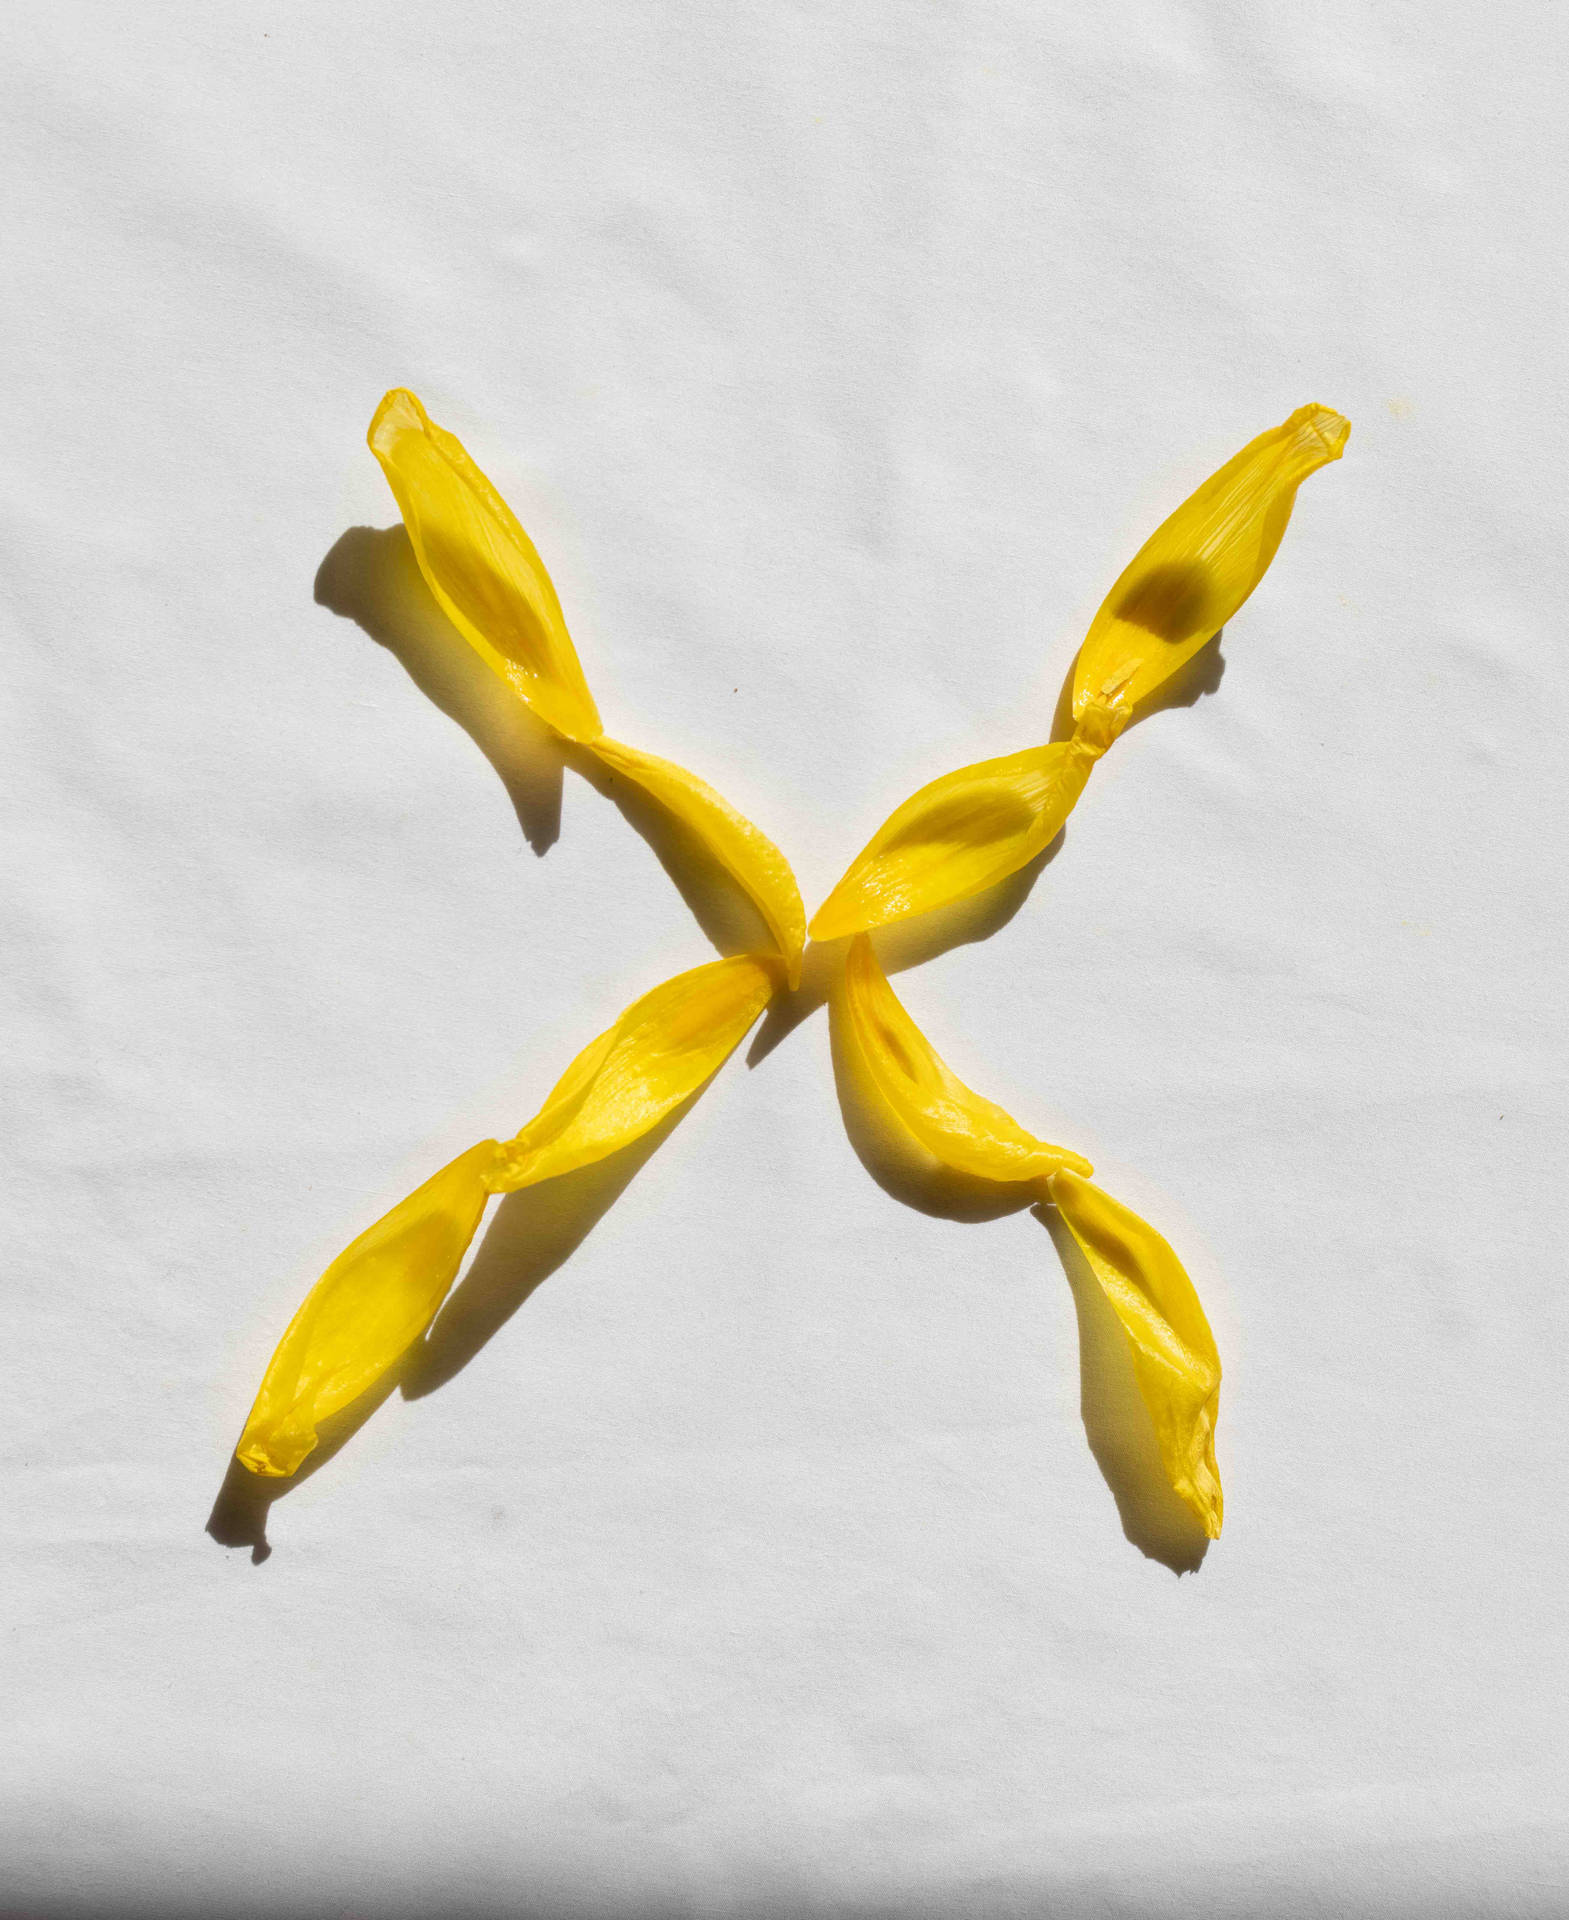 "Delicate Yellow Petals Forming the Letter X" Wallpaper